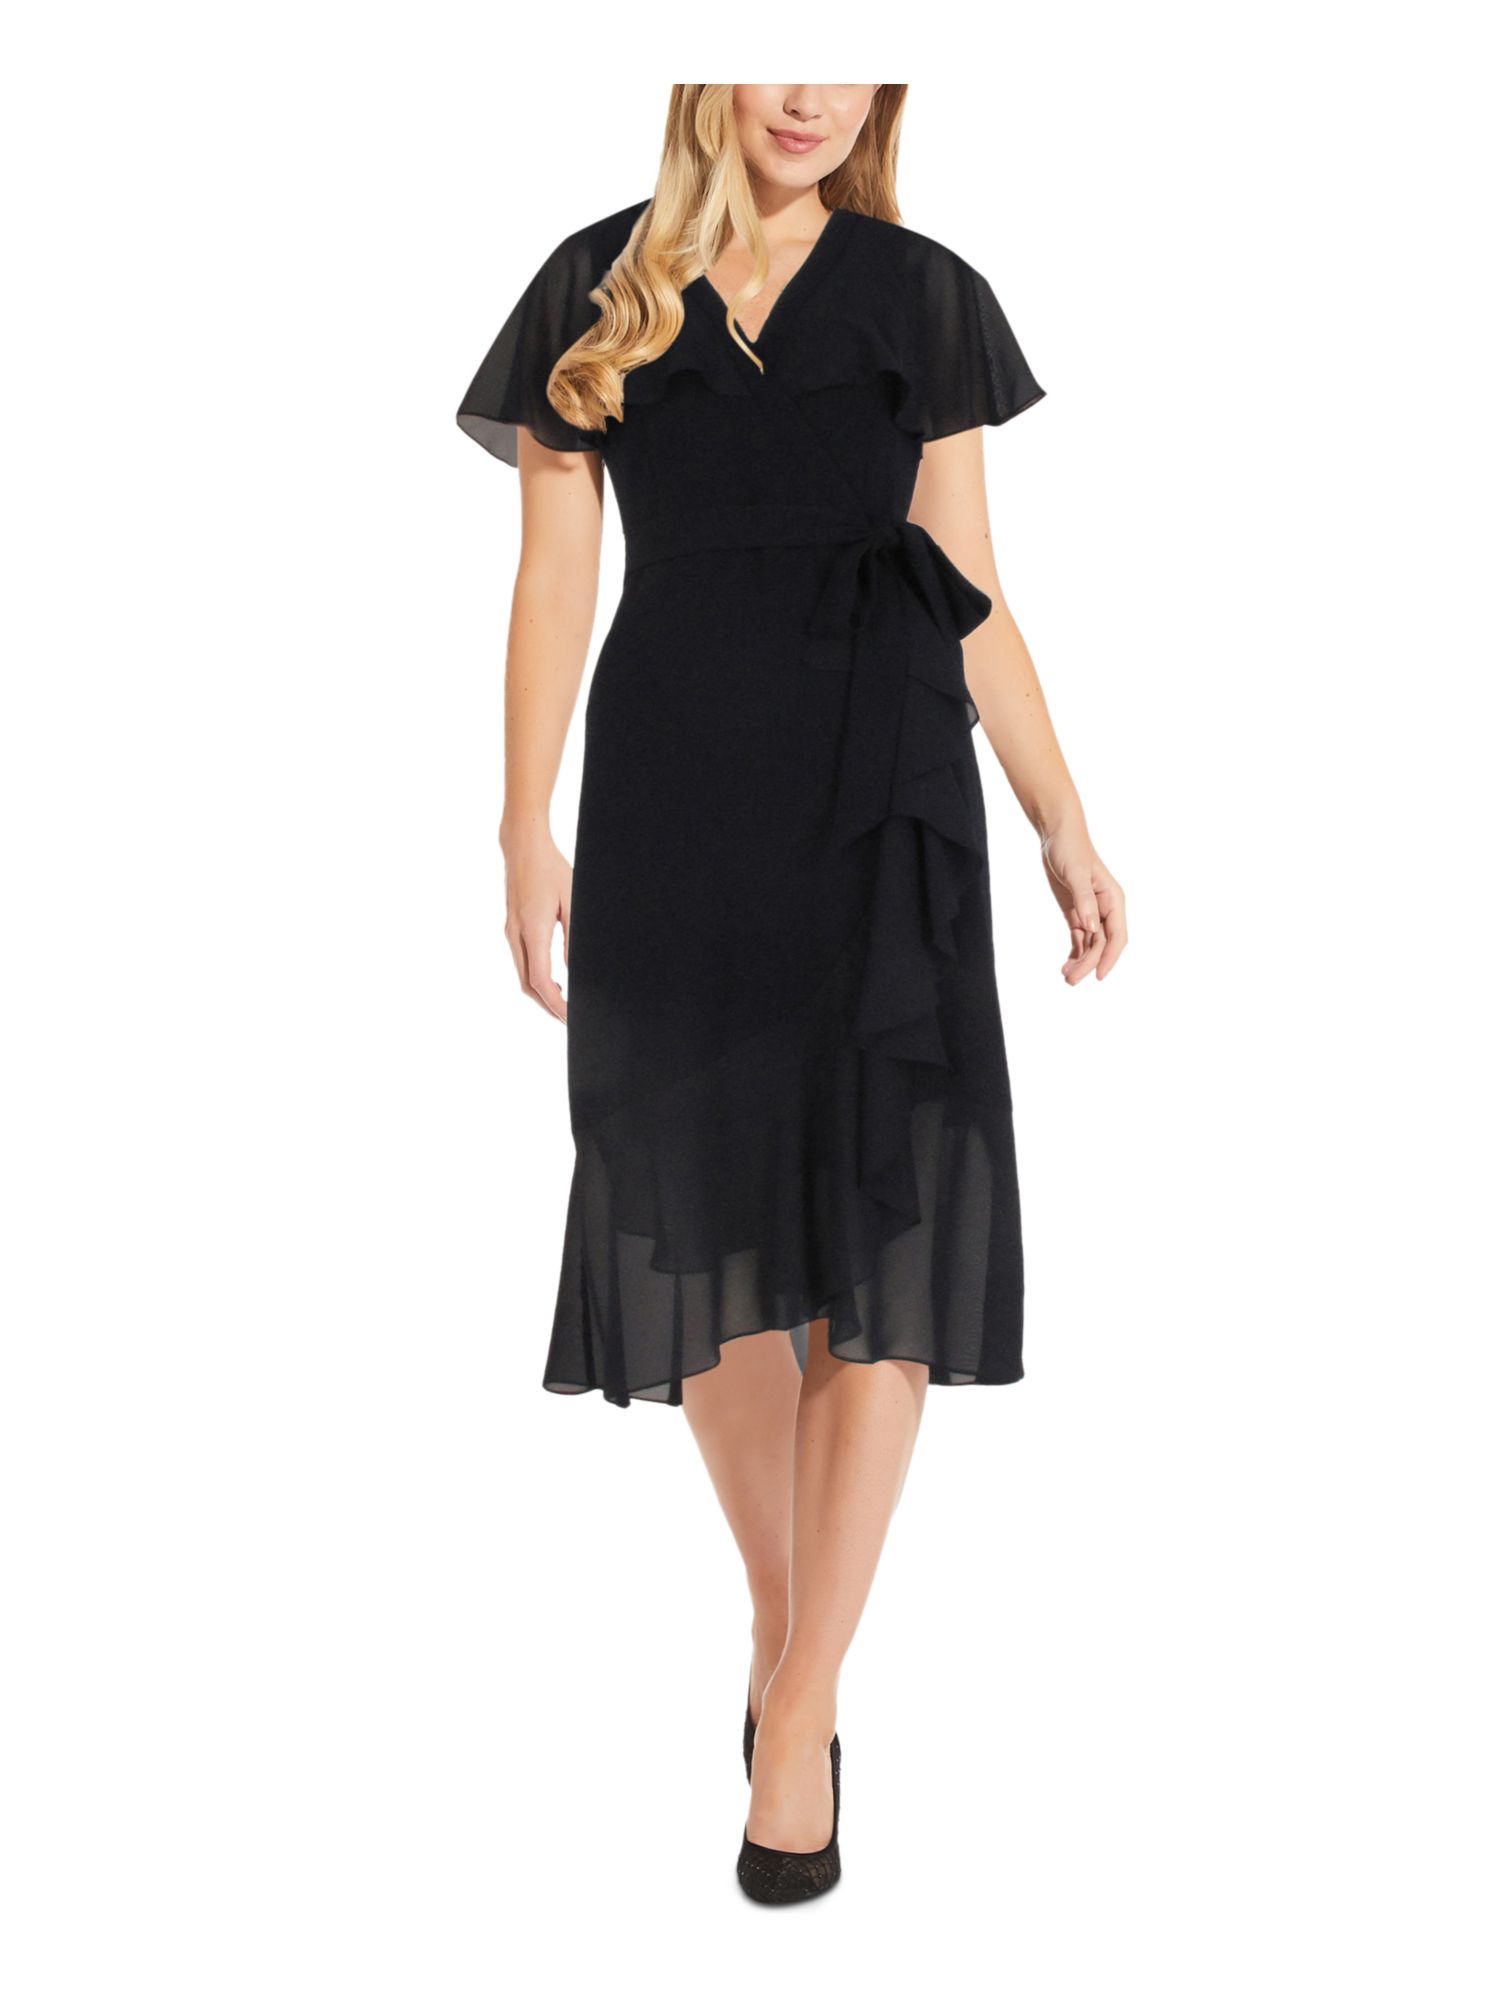 ADRIANNA PAPELL Womens Black Belted Flutter Sleeve Faux Wrap Dress 4